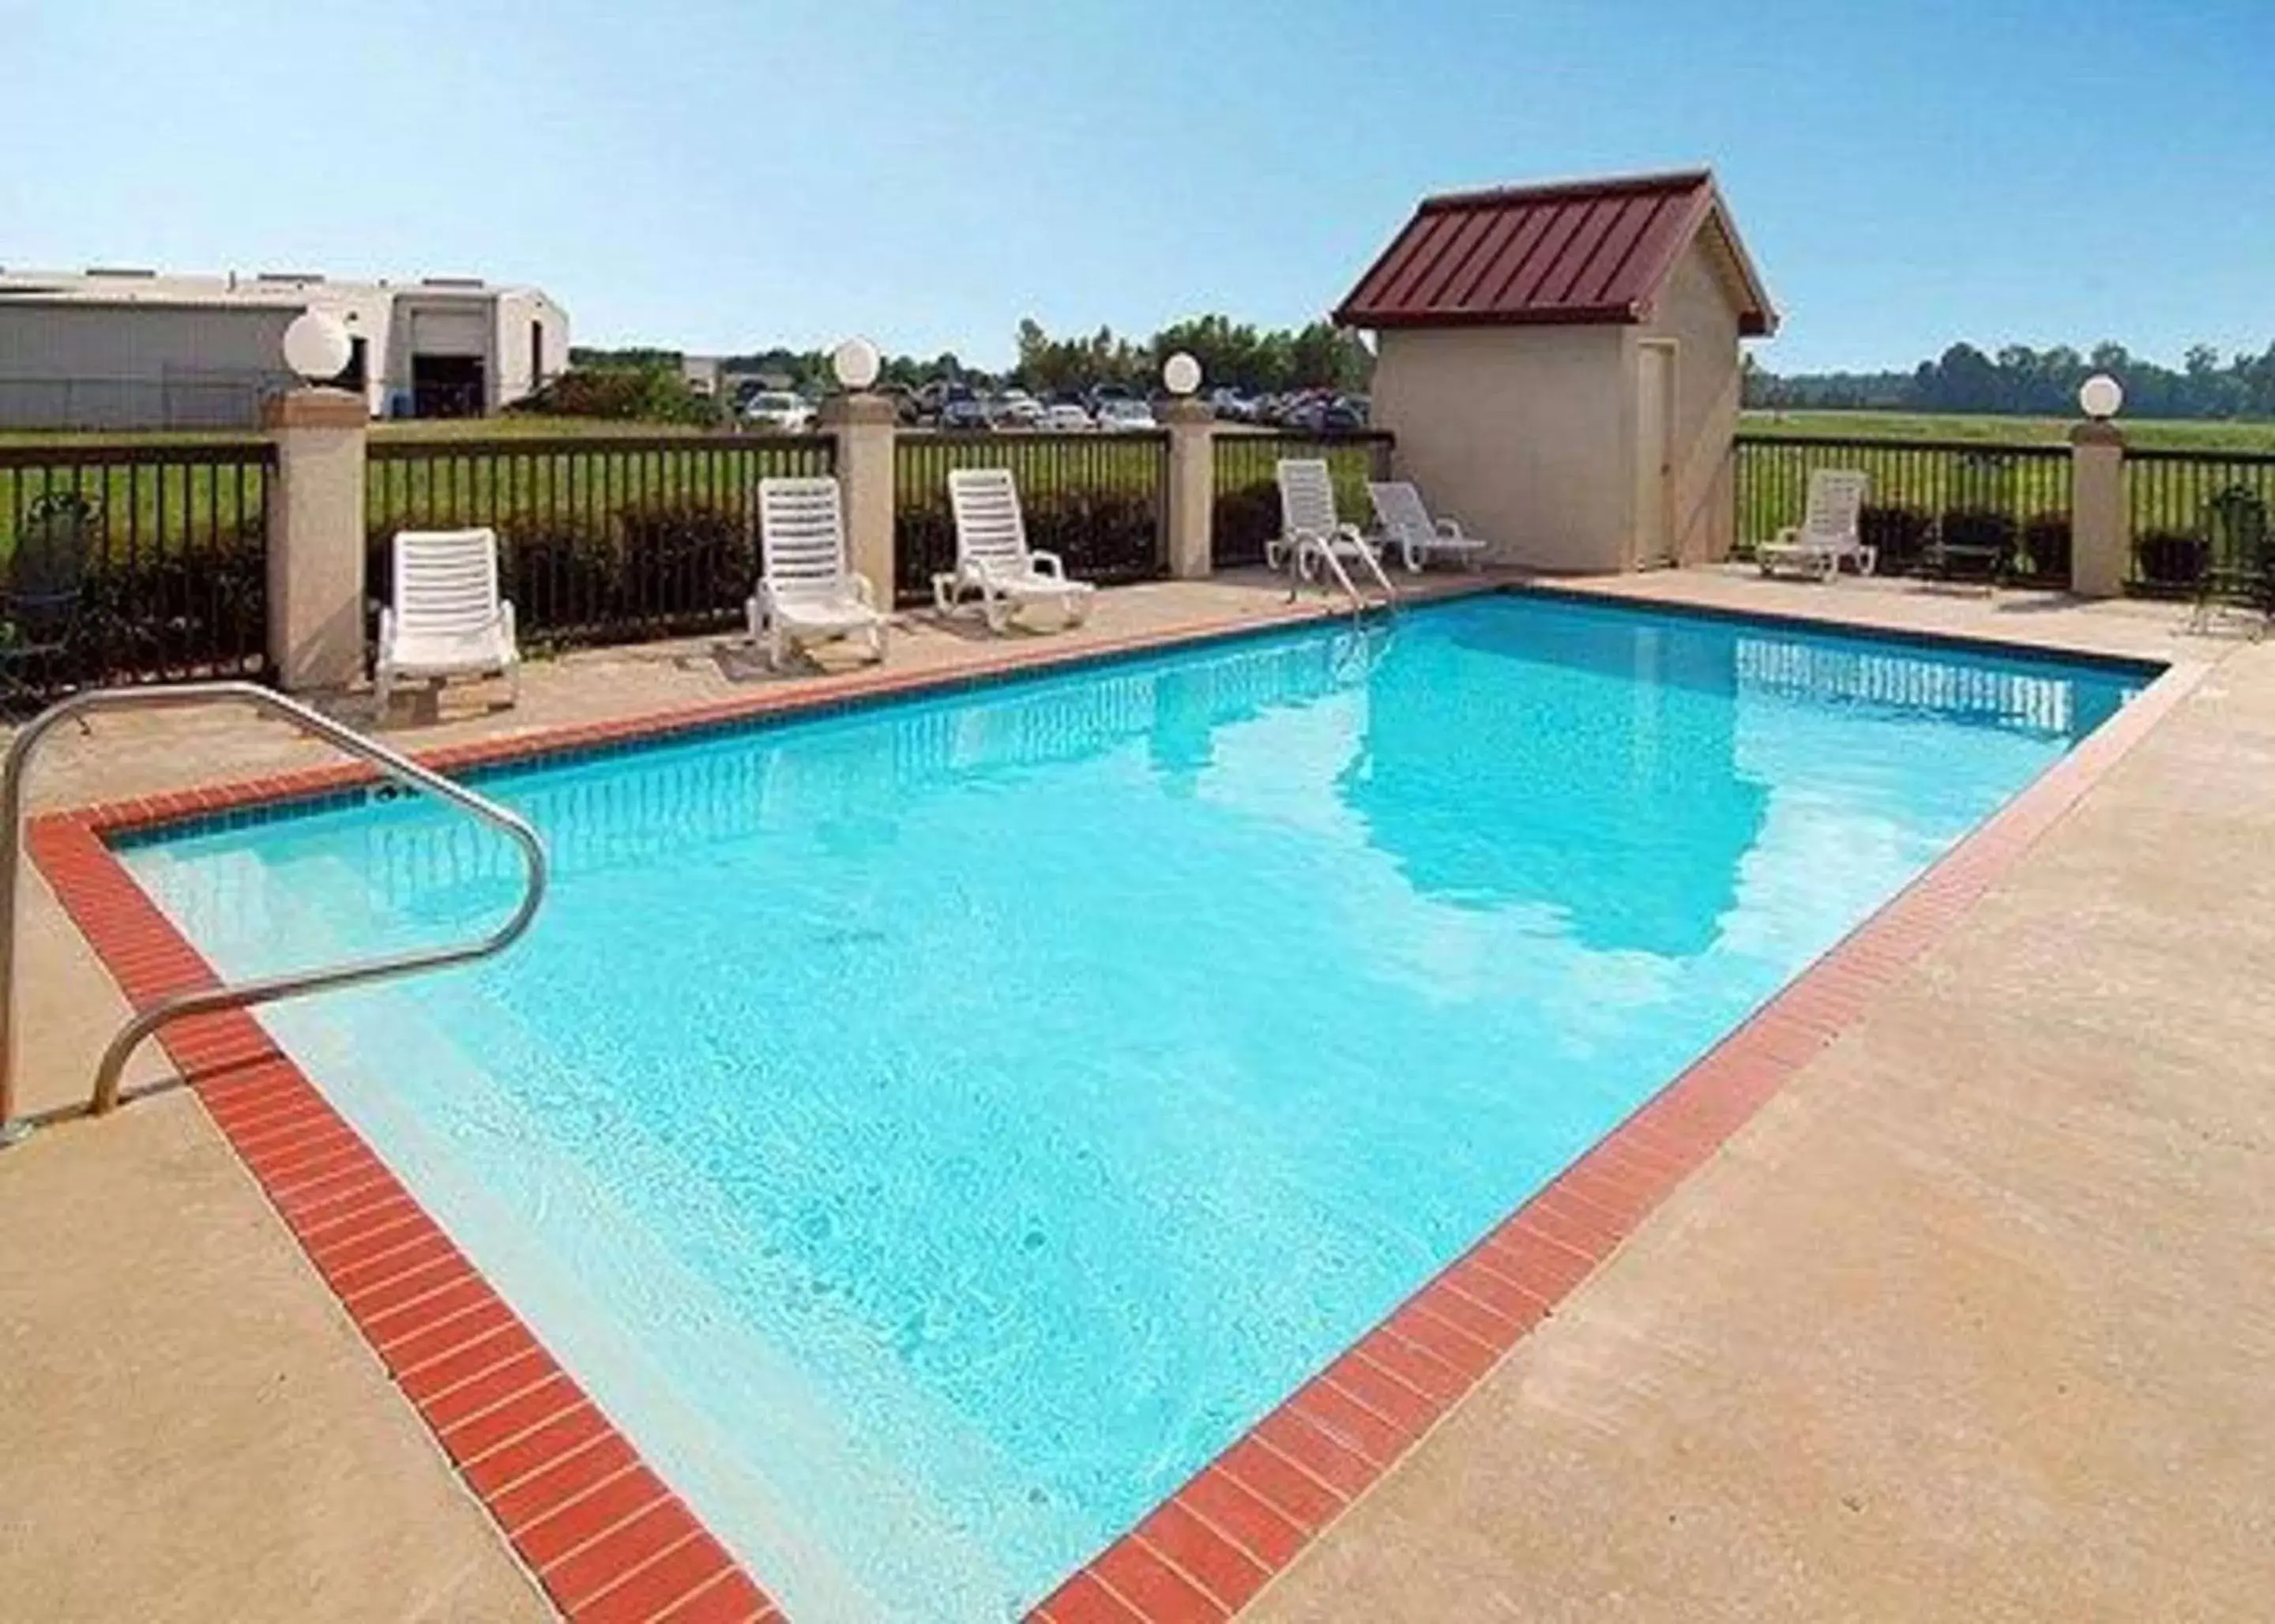 On site, Swimming Pool in Quality Inn & Suites Pine Bluff AR